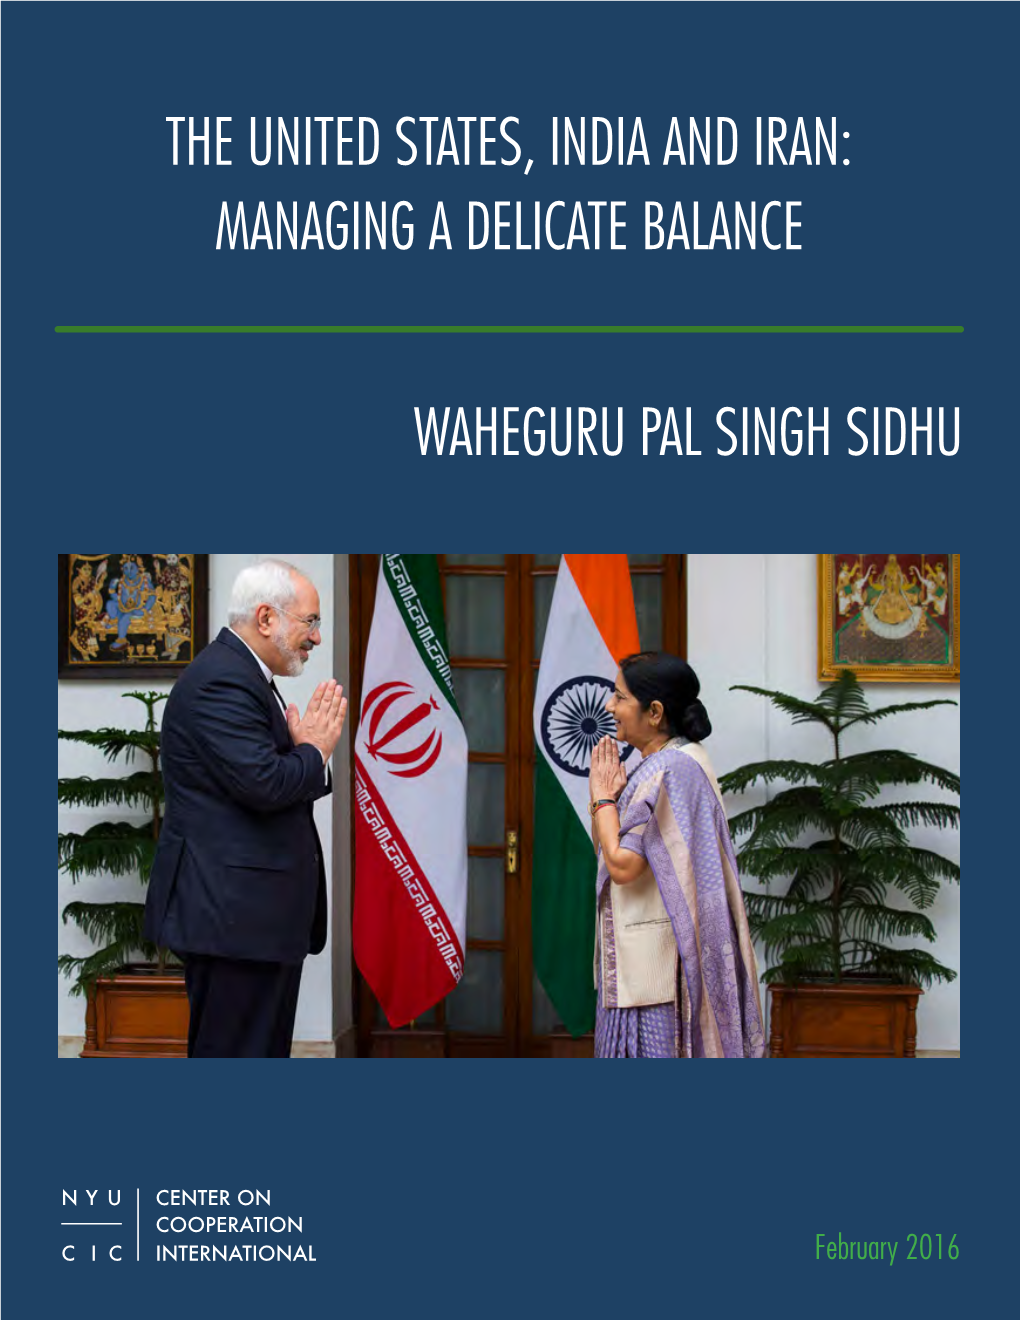 The United States, India and Iran: Managing a Delicate Balance